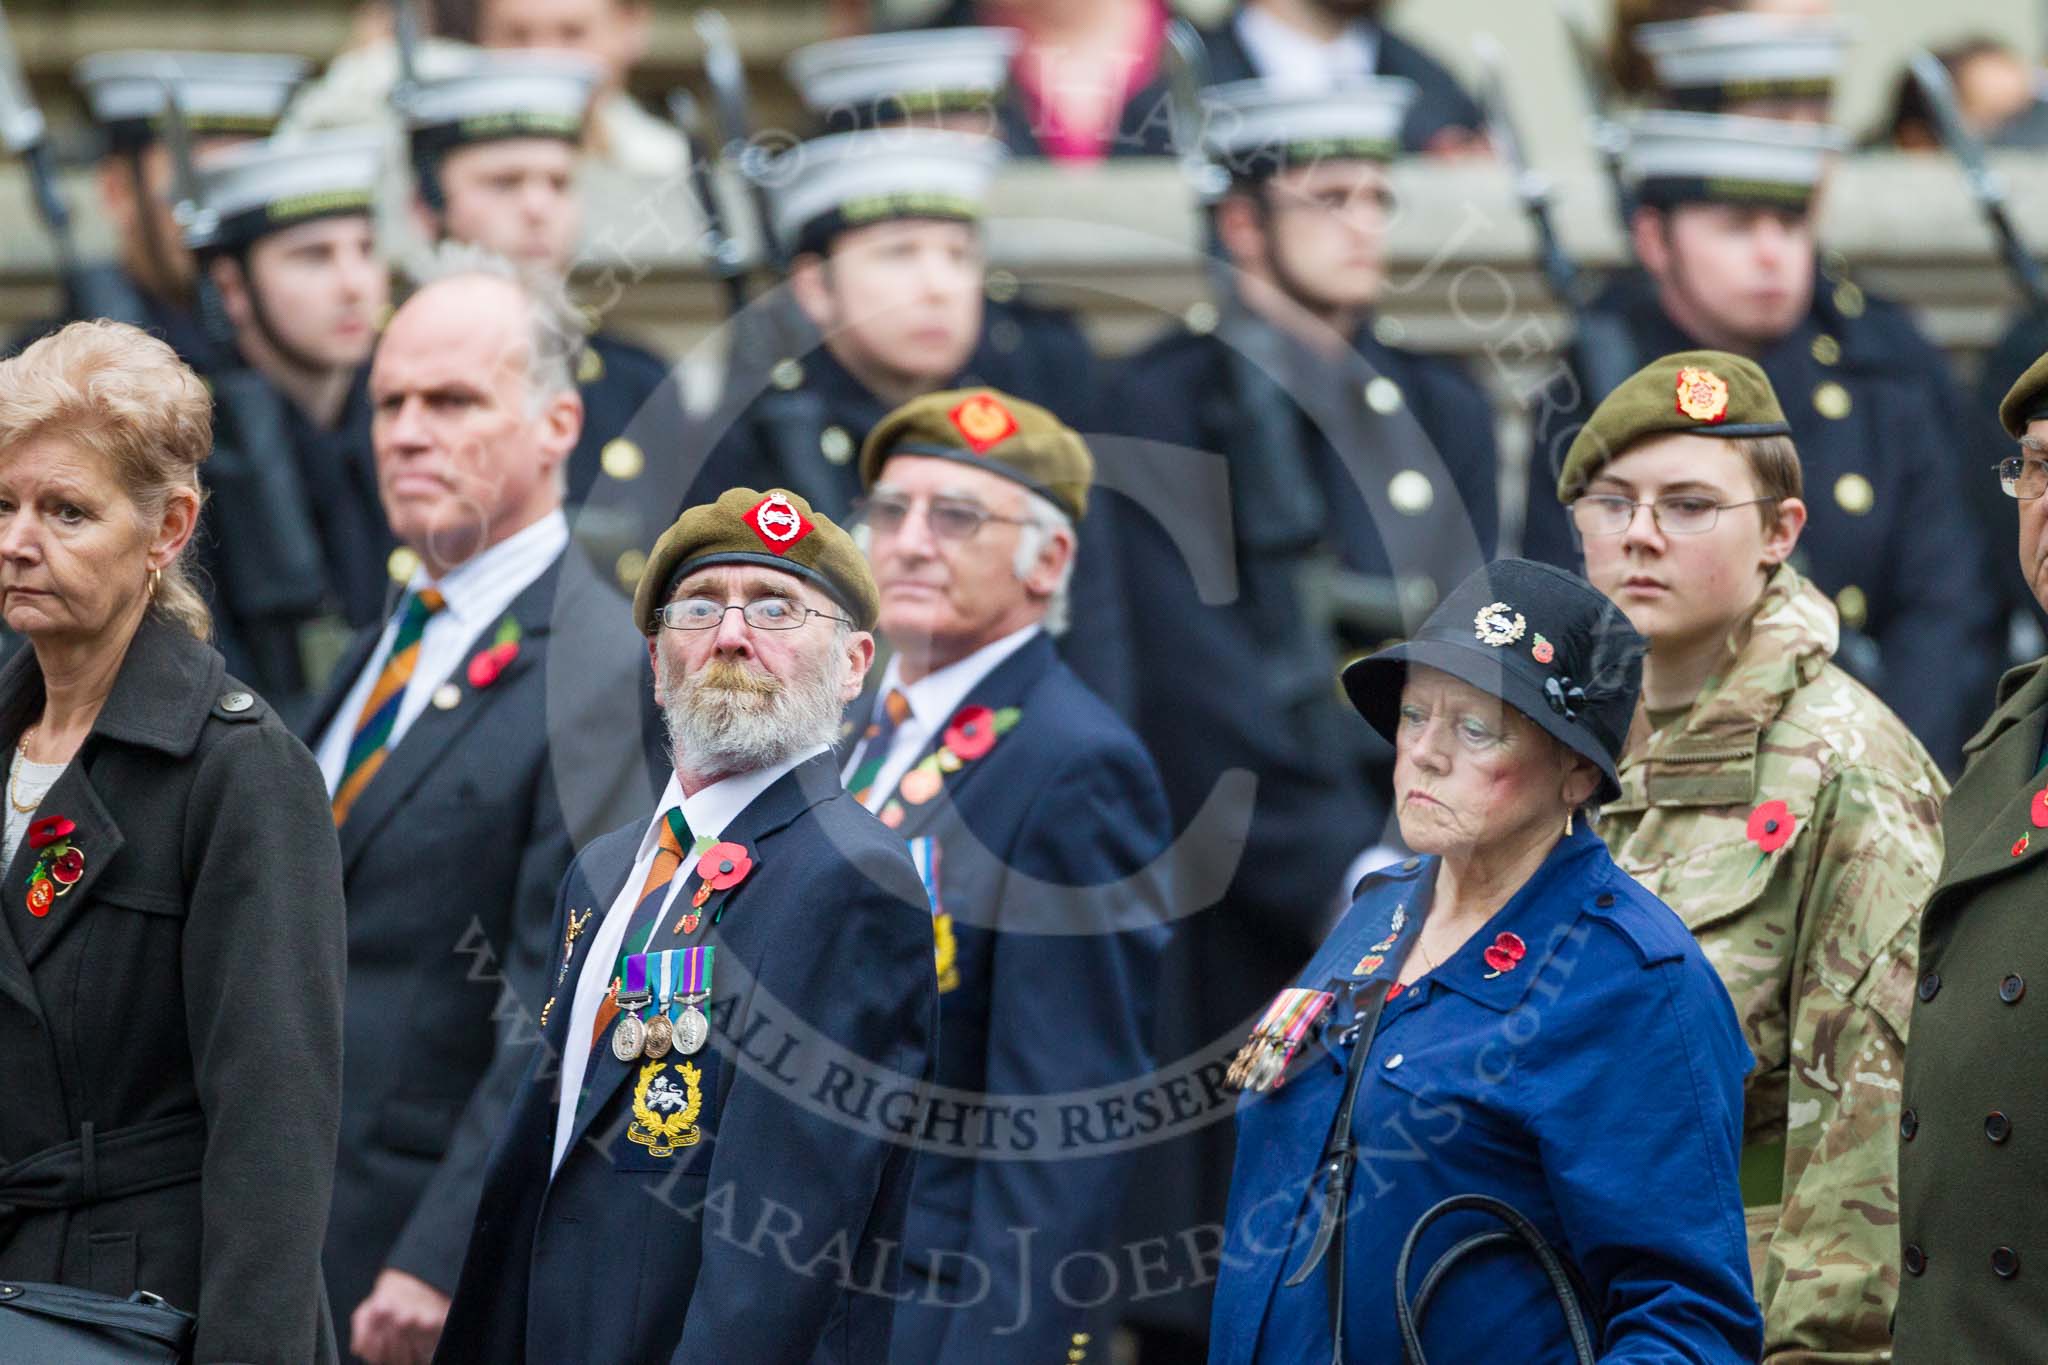 Remembrance Sunday at the Cenotaph 2015: Group A27, The King's Own Royal Border Regiment.
Cenotaph, Whitehall, London SW1,
London,
Greater London,
United Kingdom,
on 08 November 2015 at 12:13, image #1373